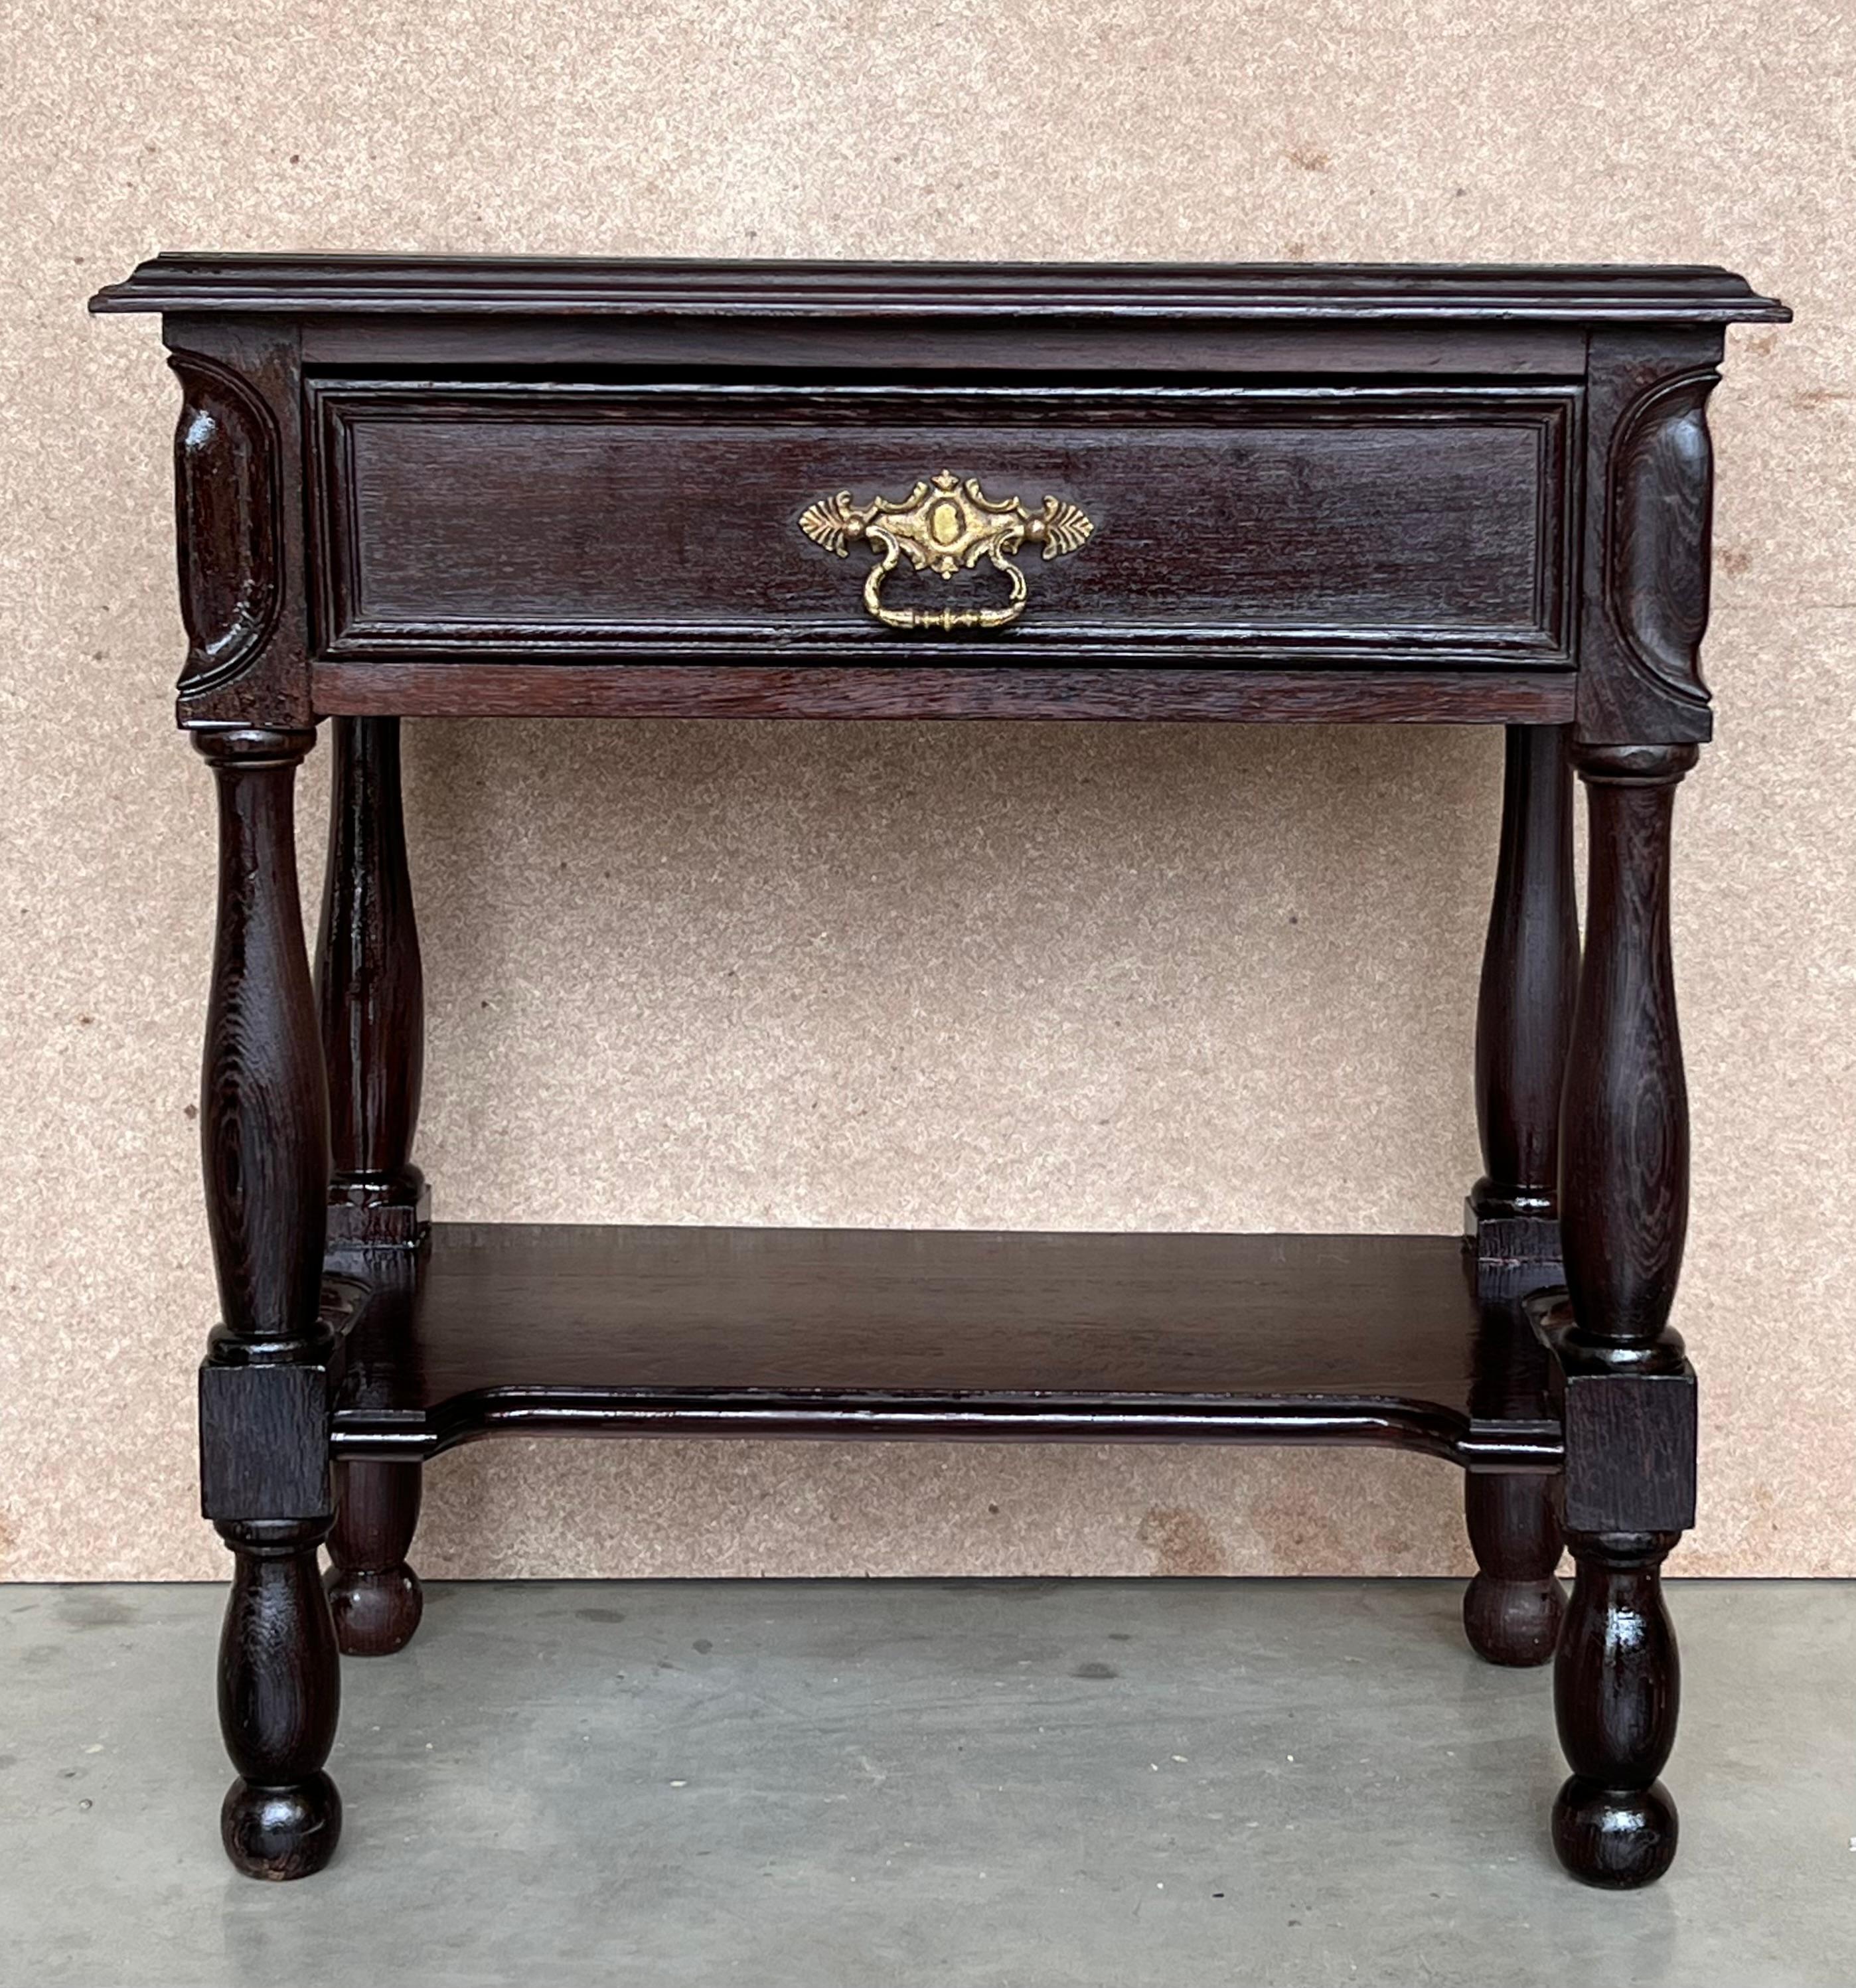 Spanish nightstands or side tables with one drawer and low shelve.
Very heavy nightstands with carved details in the corners.
You can use like a coffee table, side table... it´s very nice for any space.